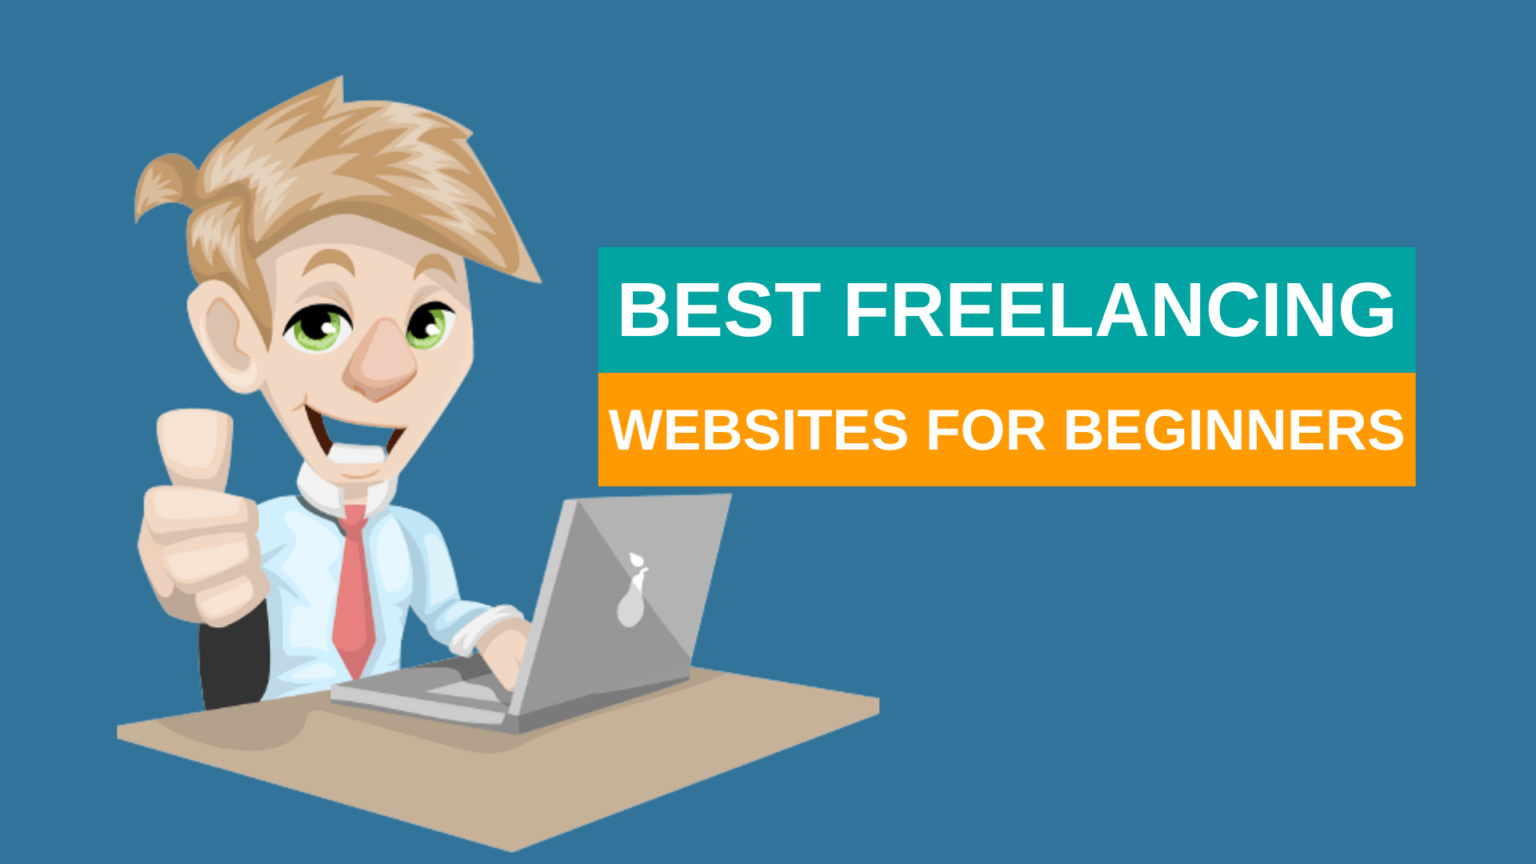 The best freelancing sites for beginners